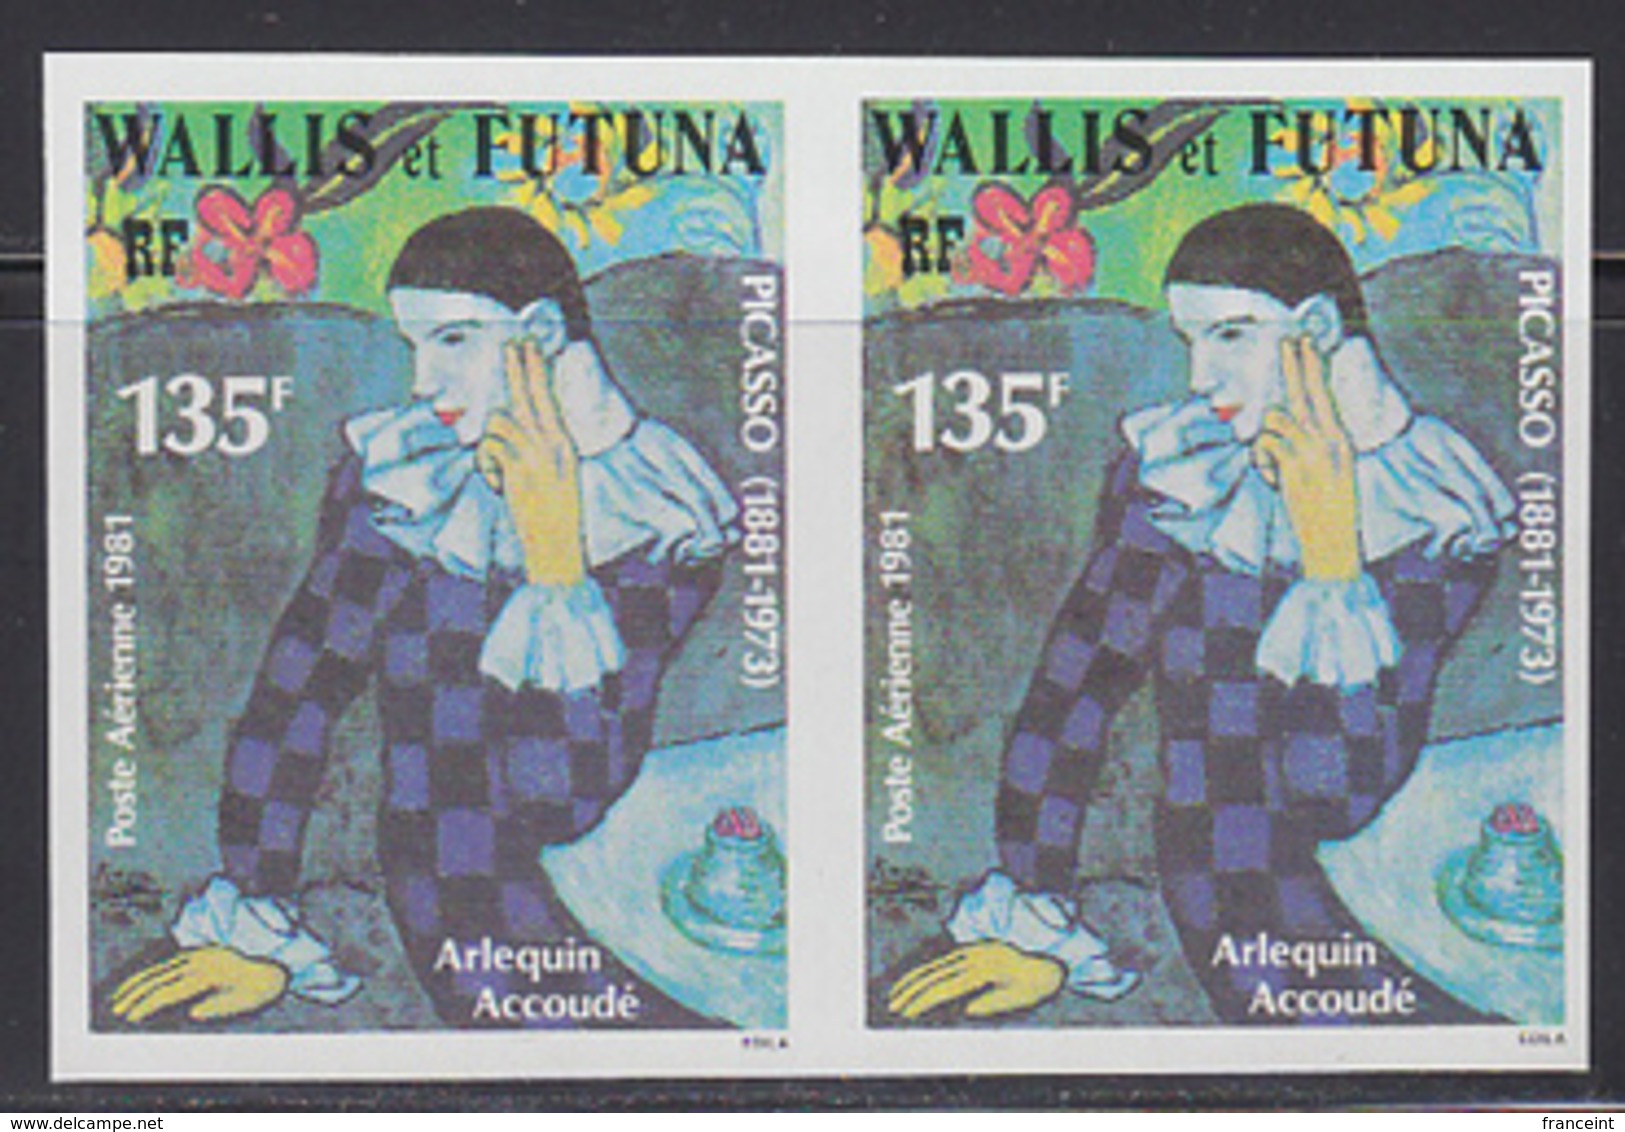 WALLIS & FUTUNA (1981) Harlequin By Picasso. Imperforate Pair. Scott No C109, Yvert No PA111. - Imperforates, Proofs & Errors